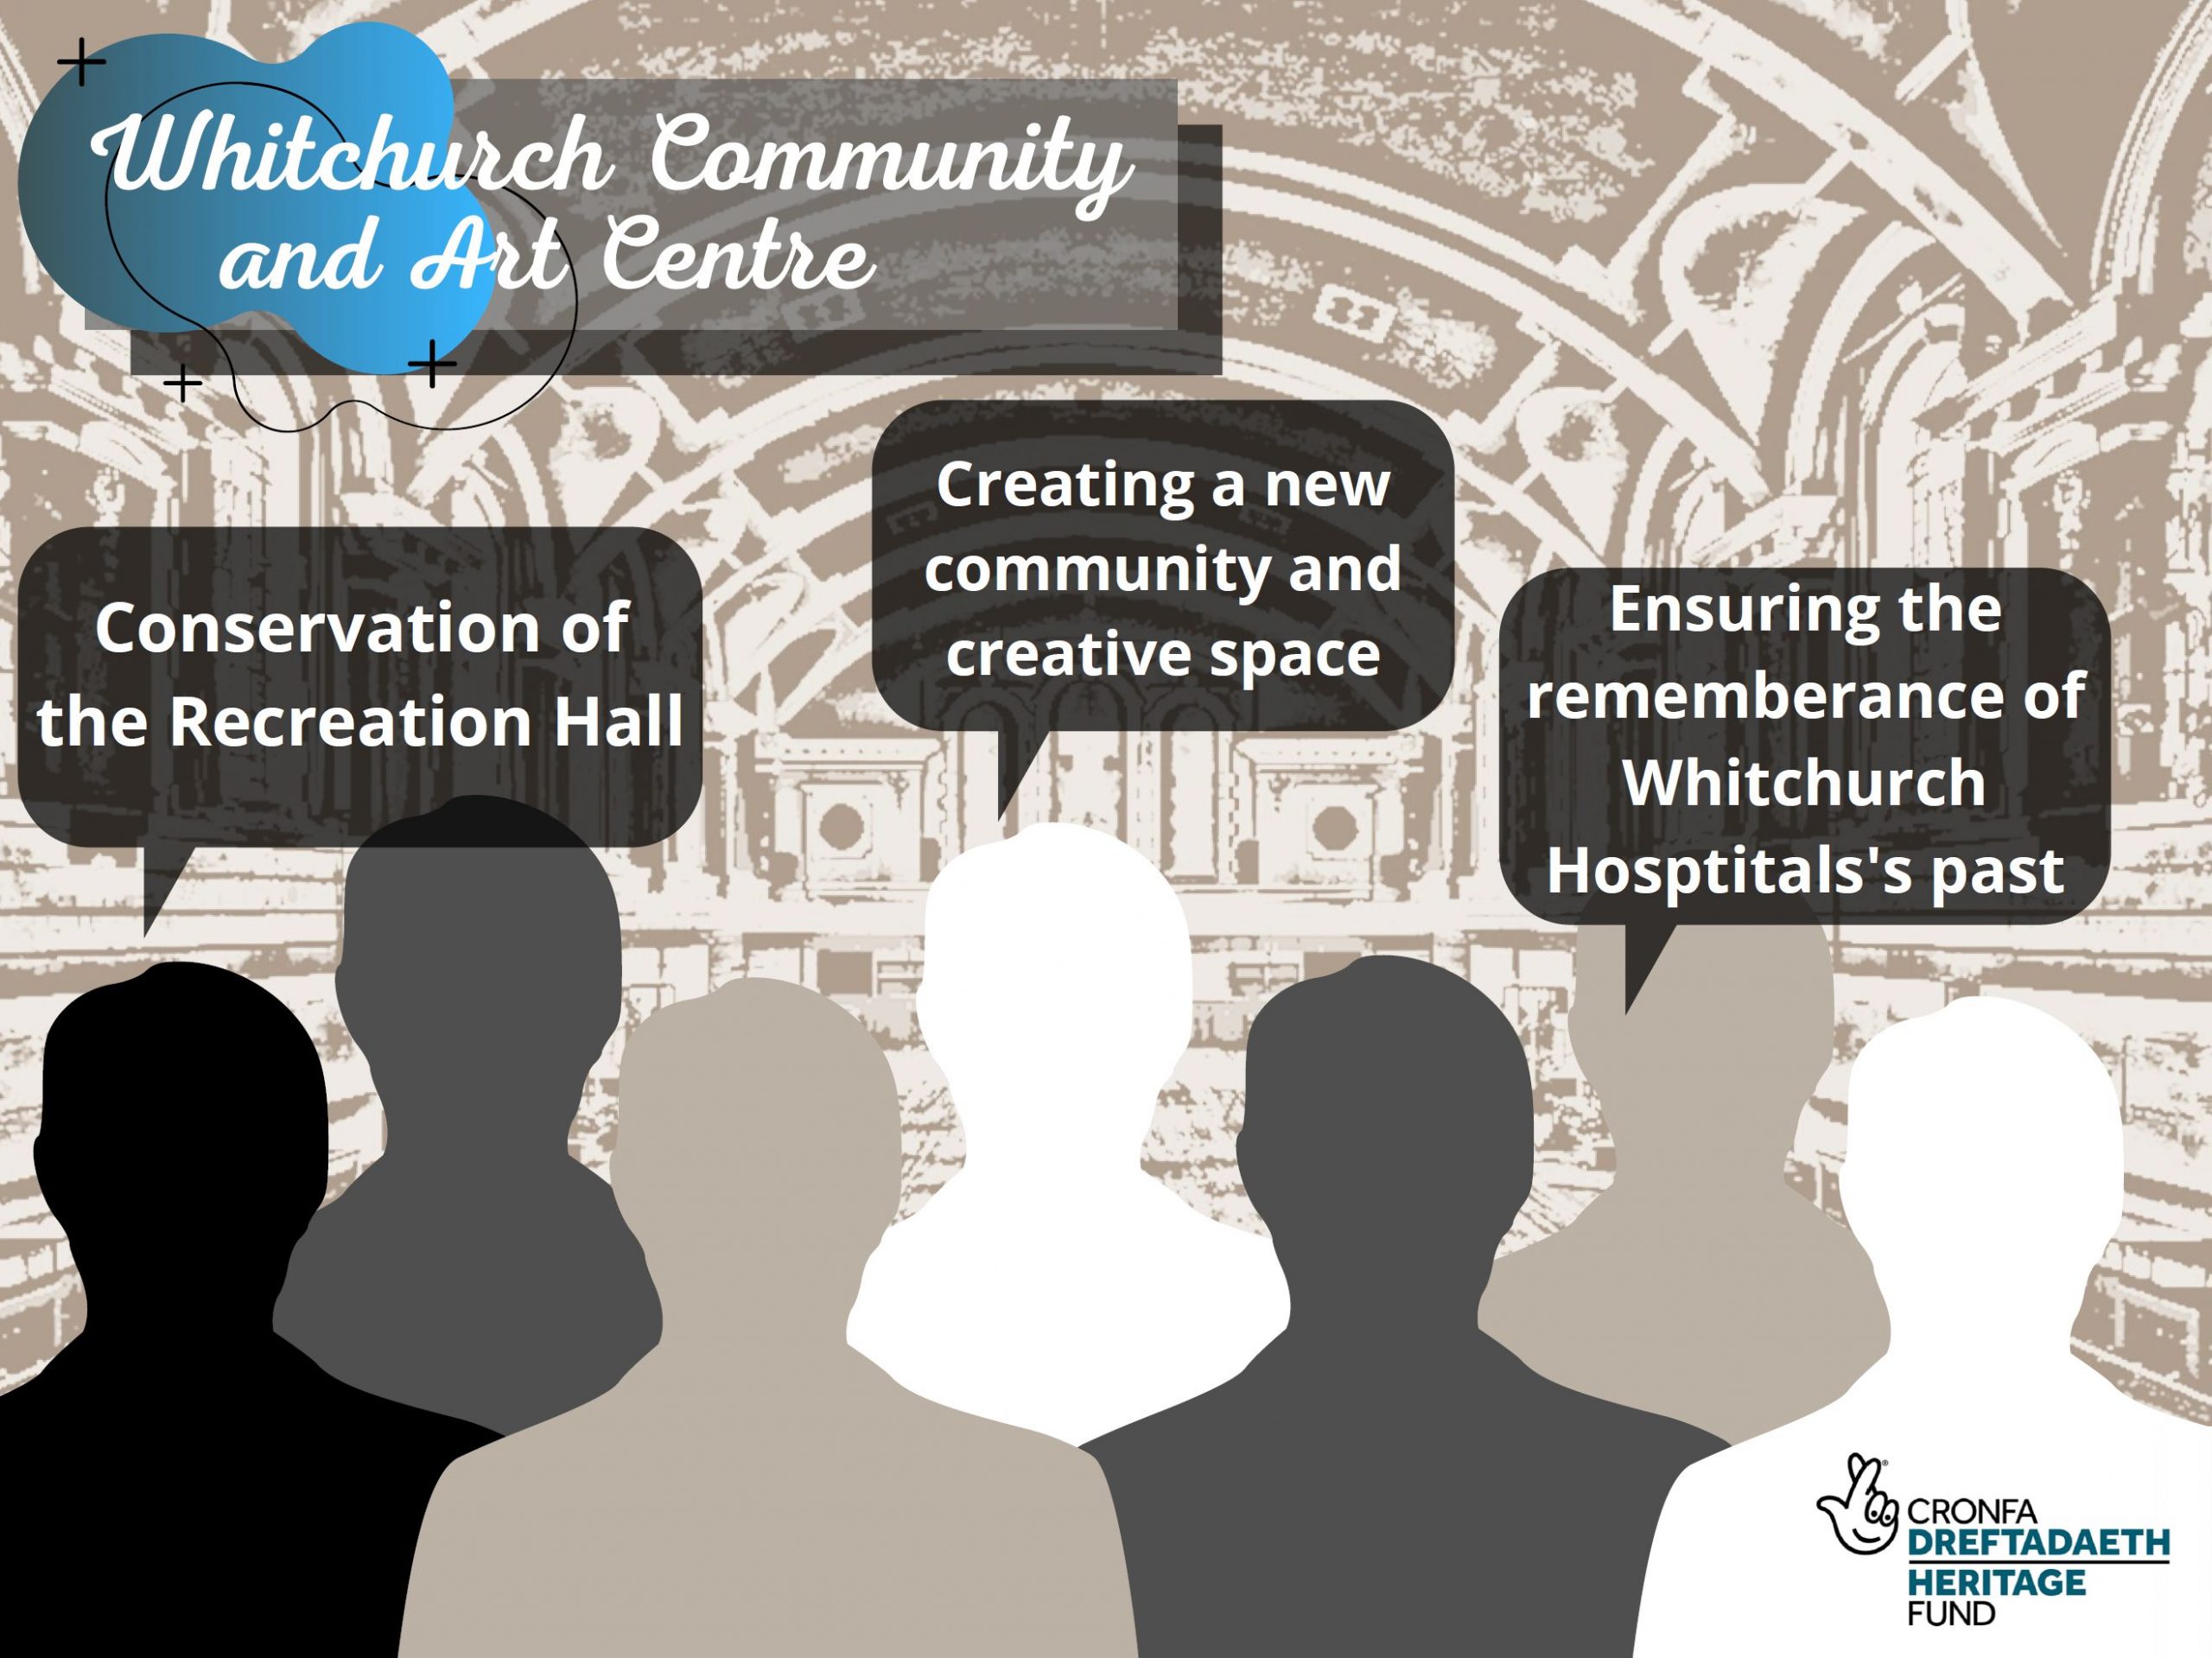 Whitchurch Community and Arts Centre